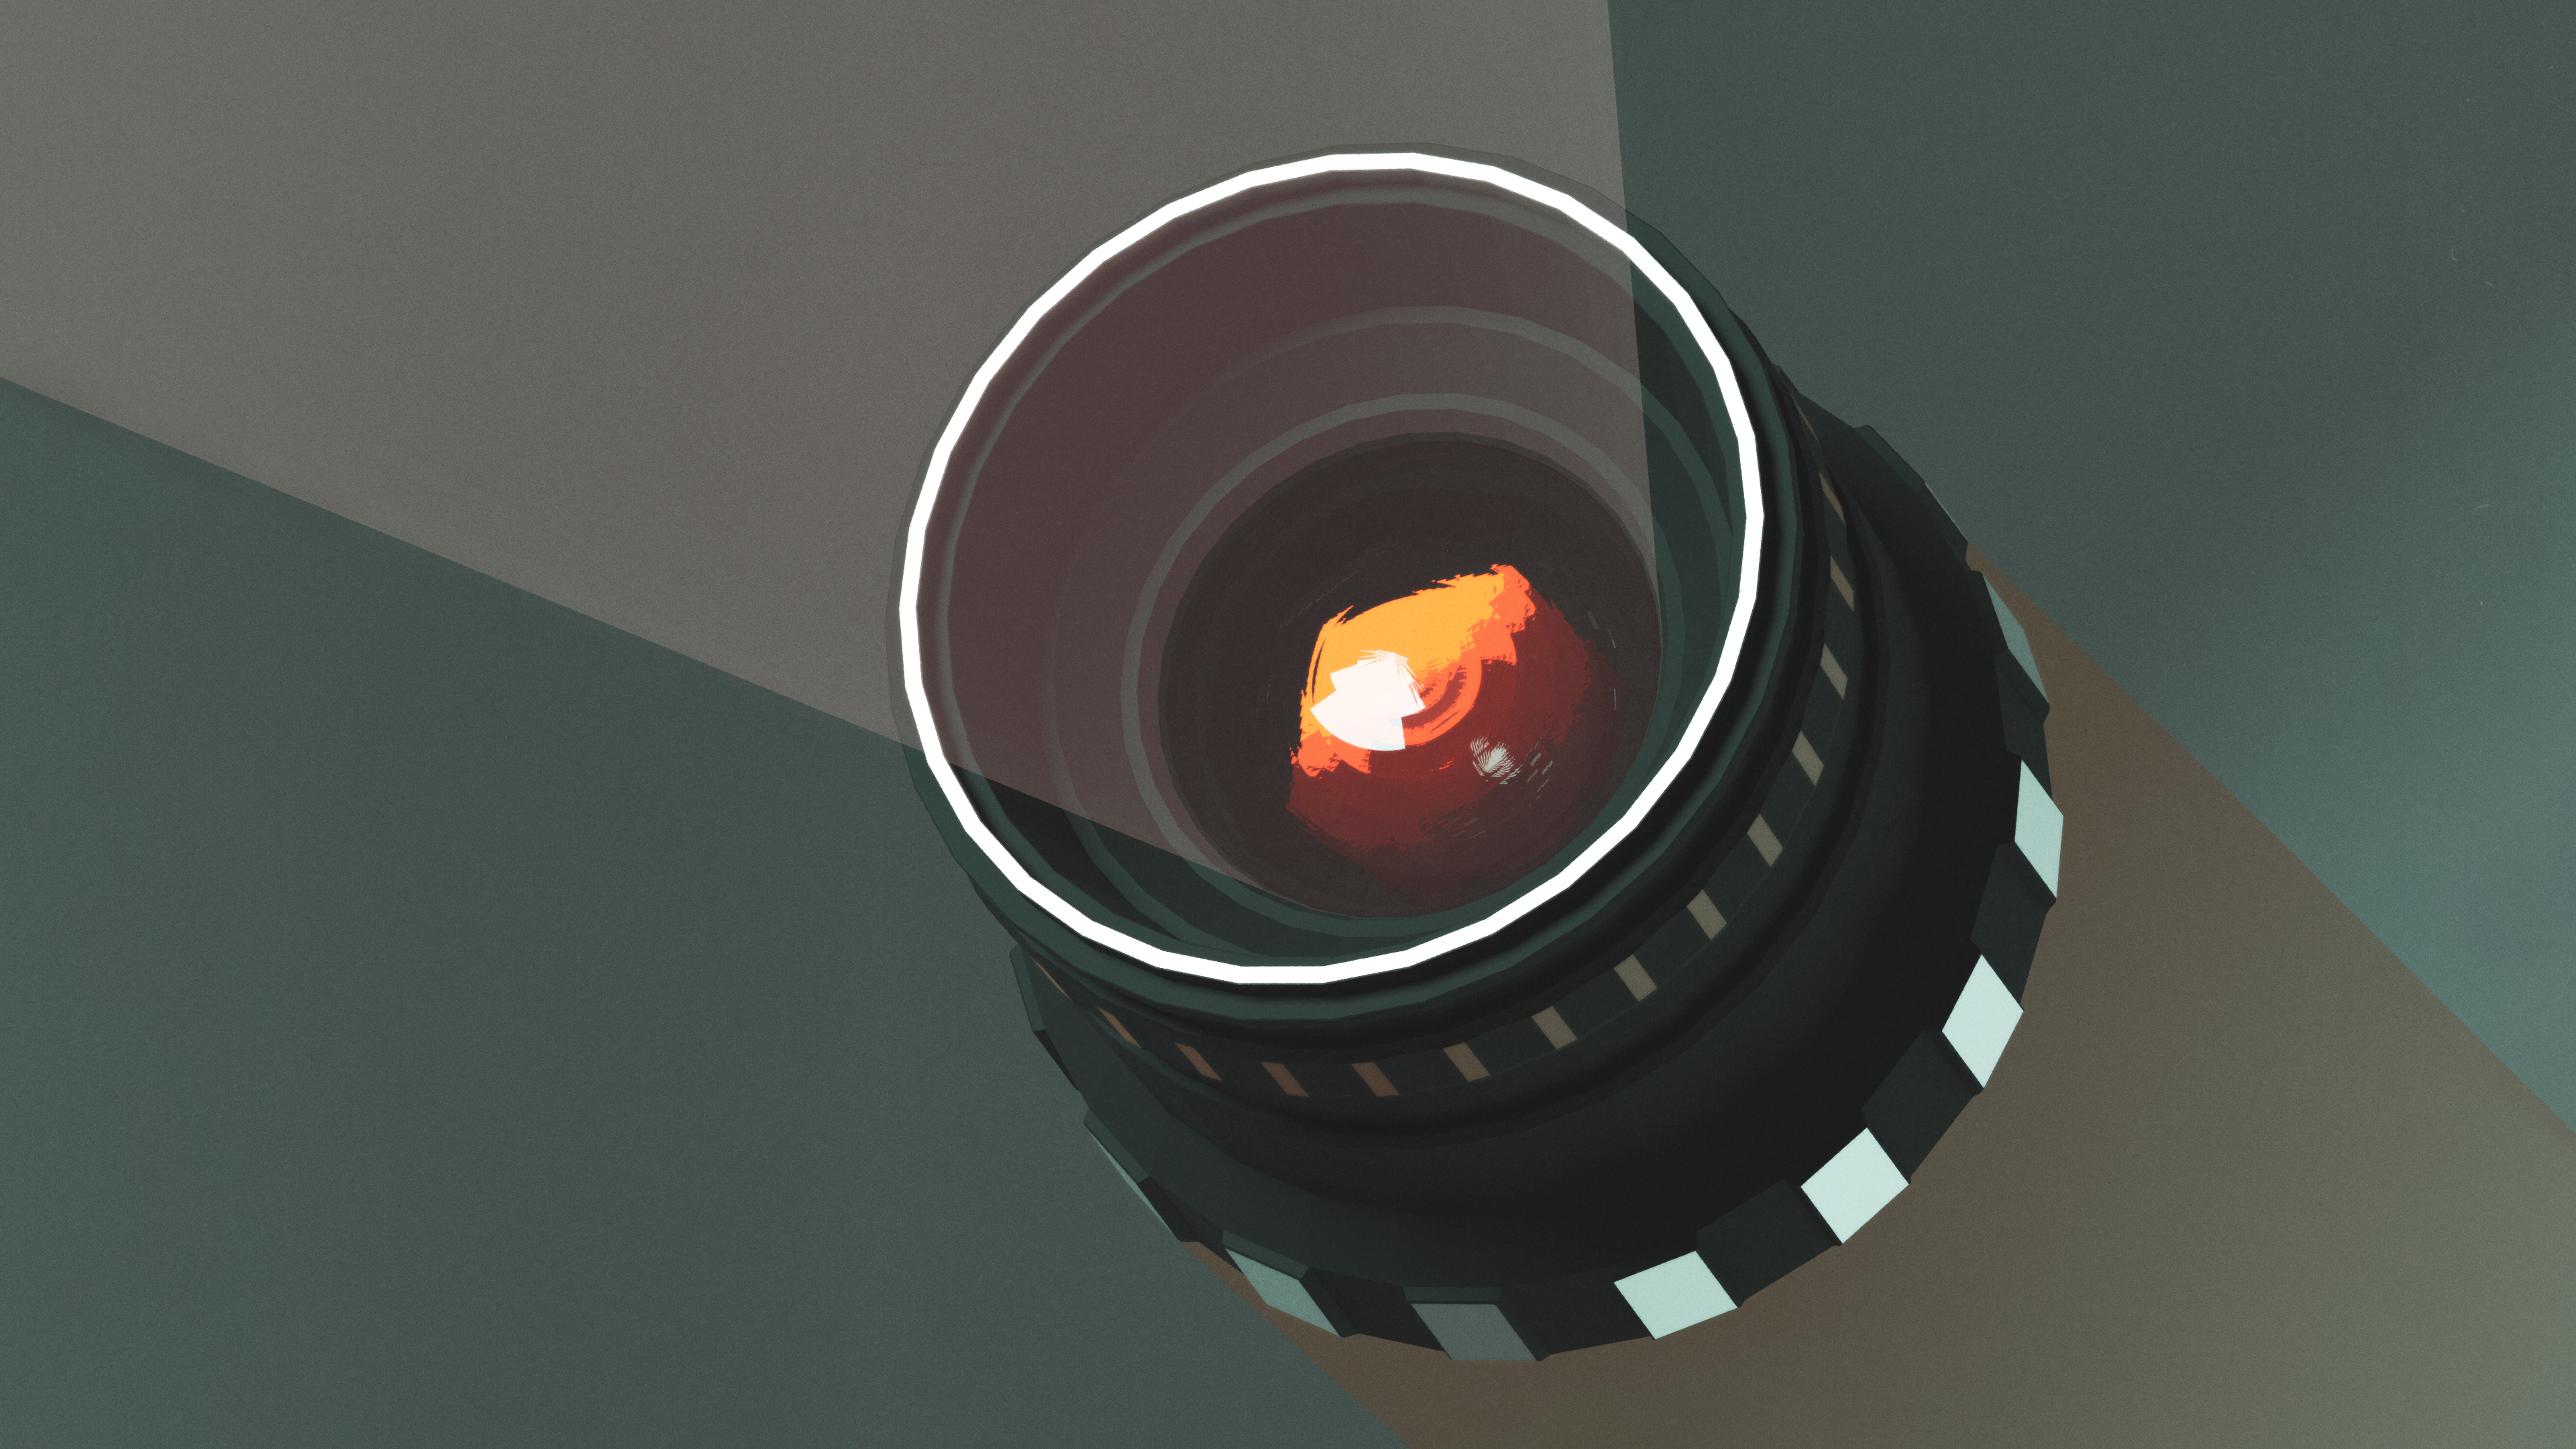 General 3840x2160 CGI lens teal red Blender retro style minimalism lights ray tracing